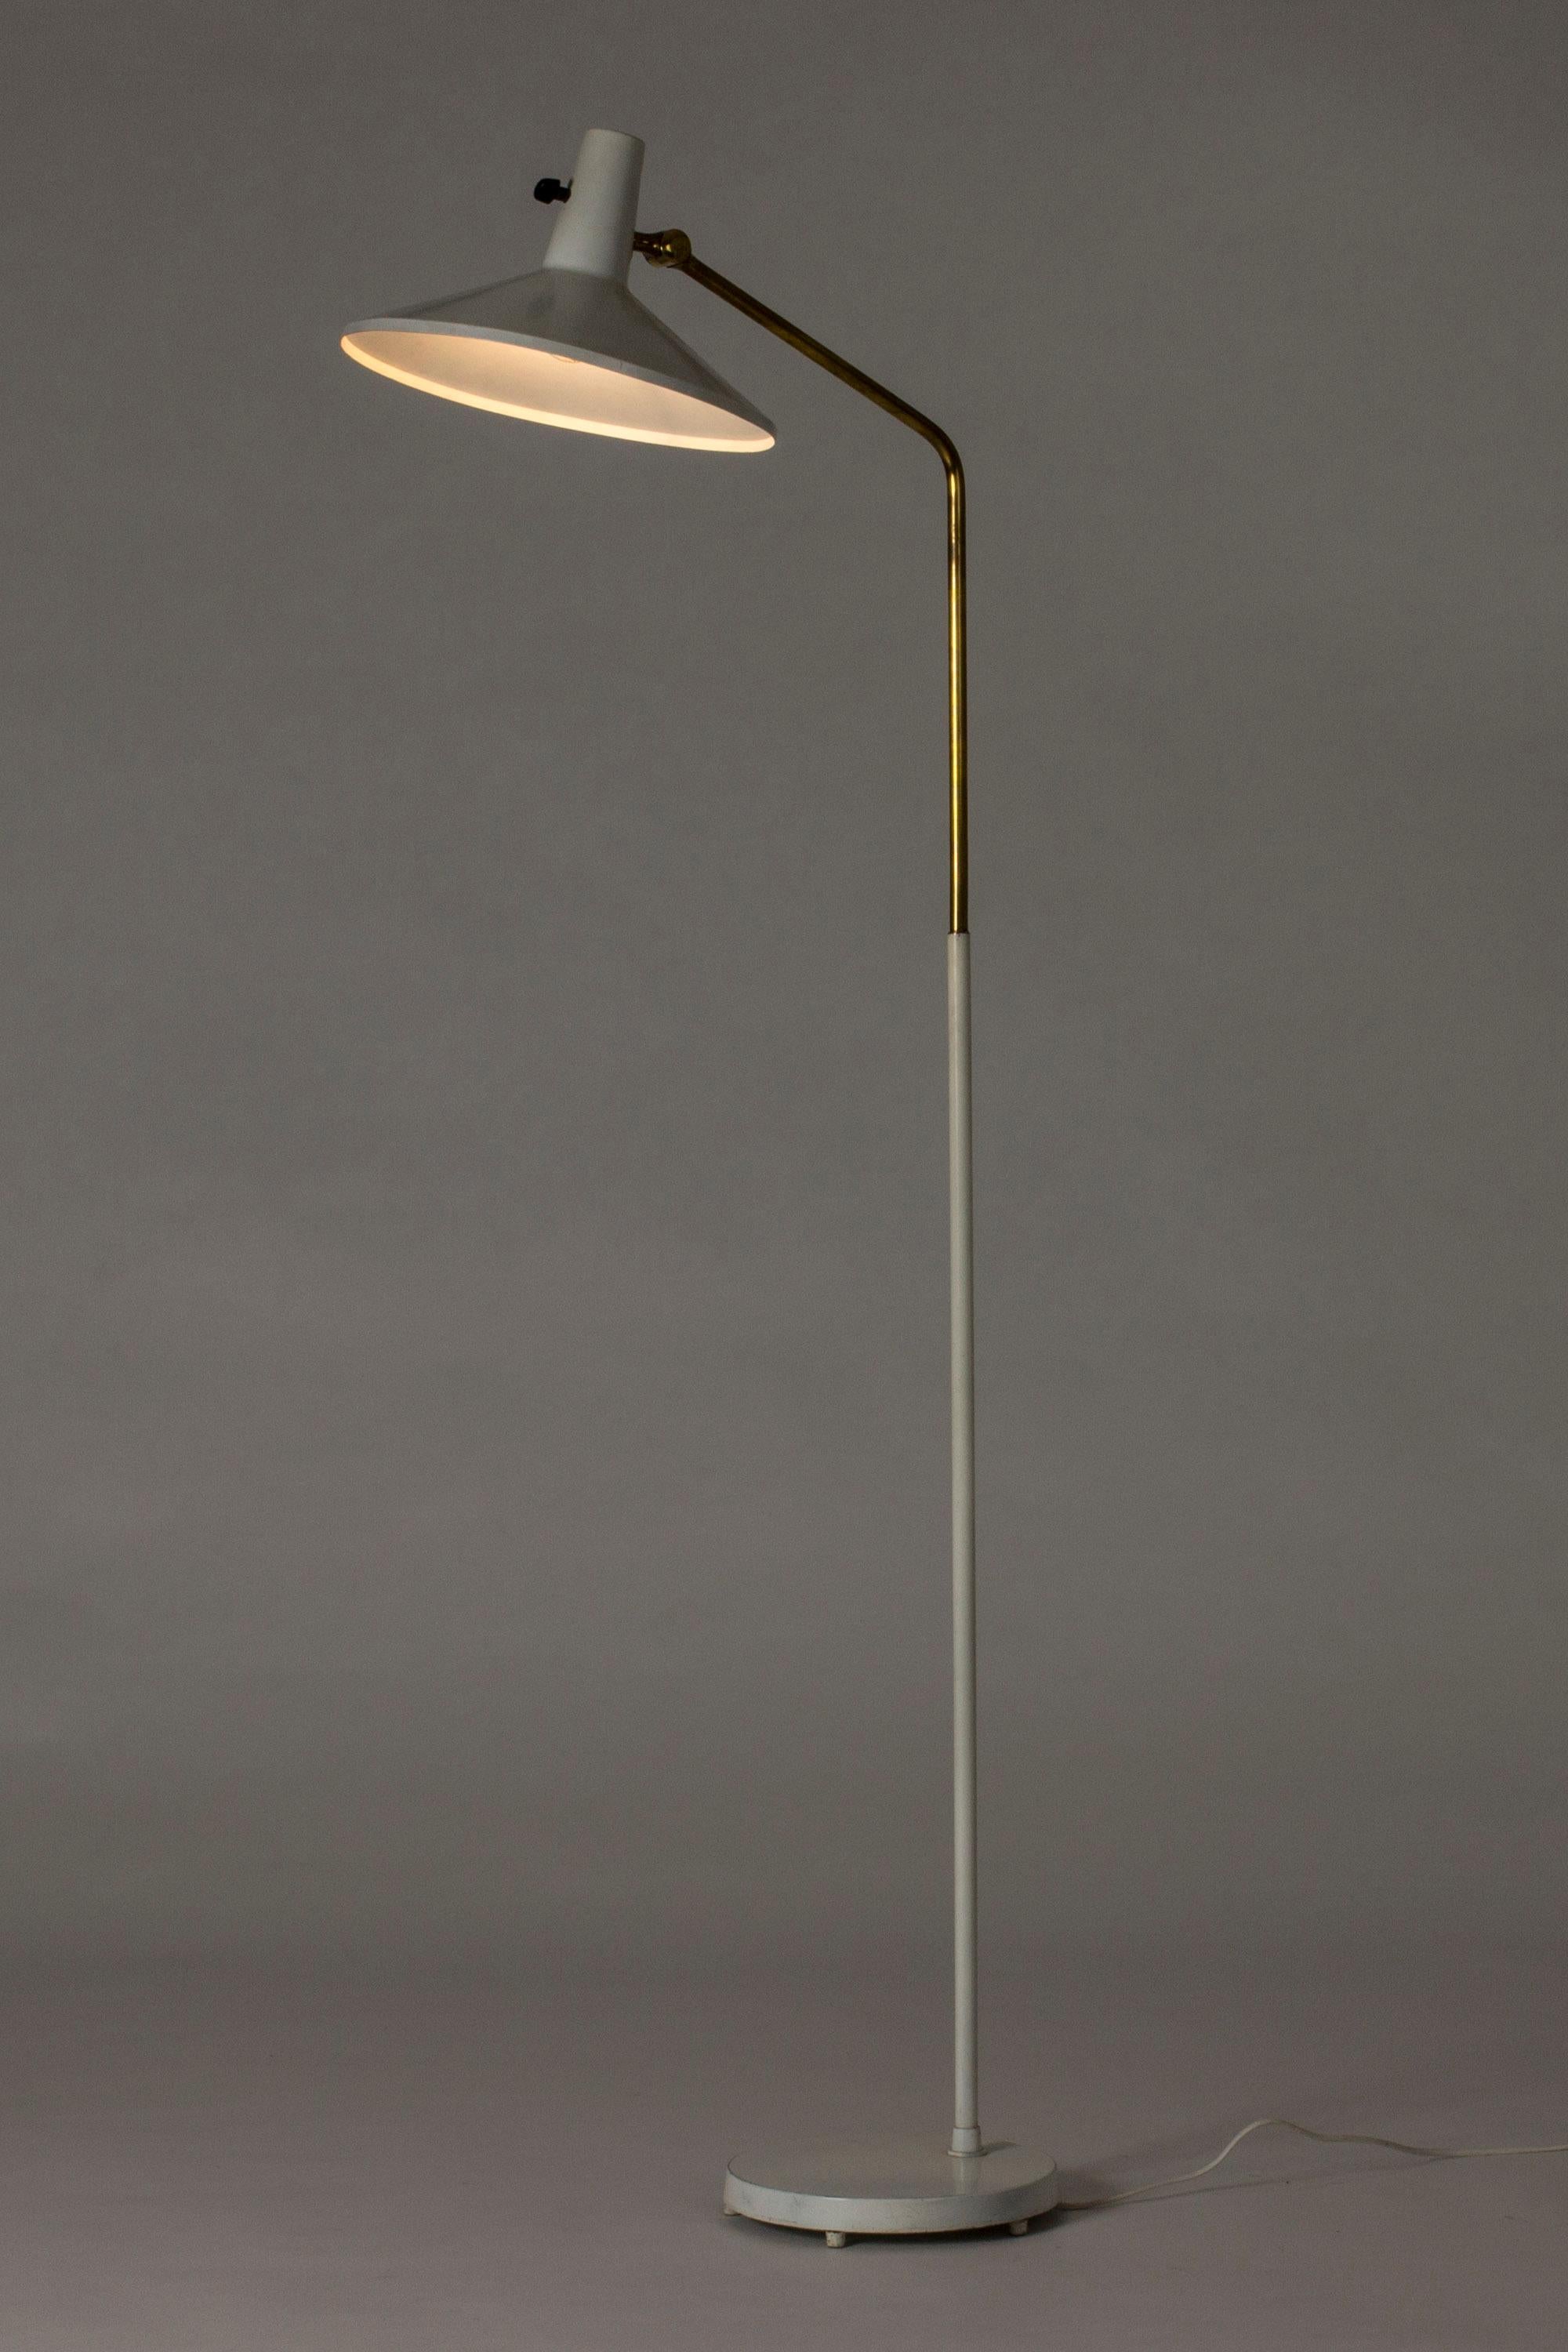 White lacquered metal and brass floor lamp with an edgy silhouette by Bertil Brisborg, designed for the lighting department at NK department store.